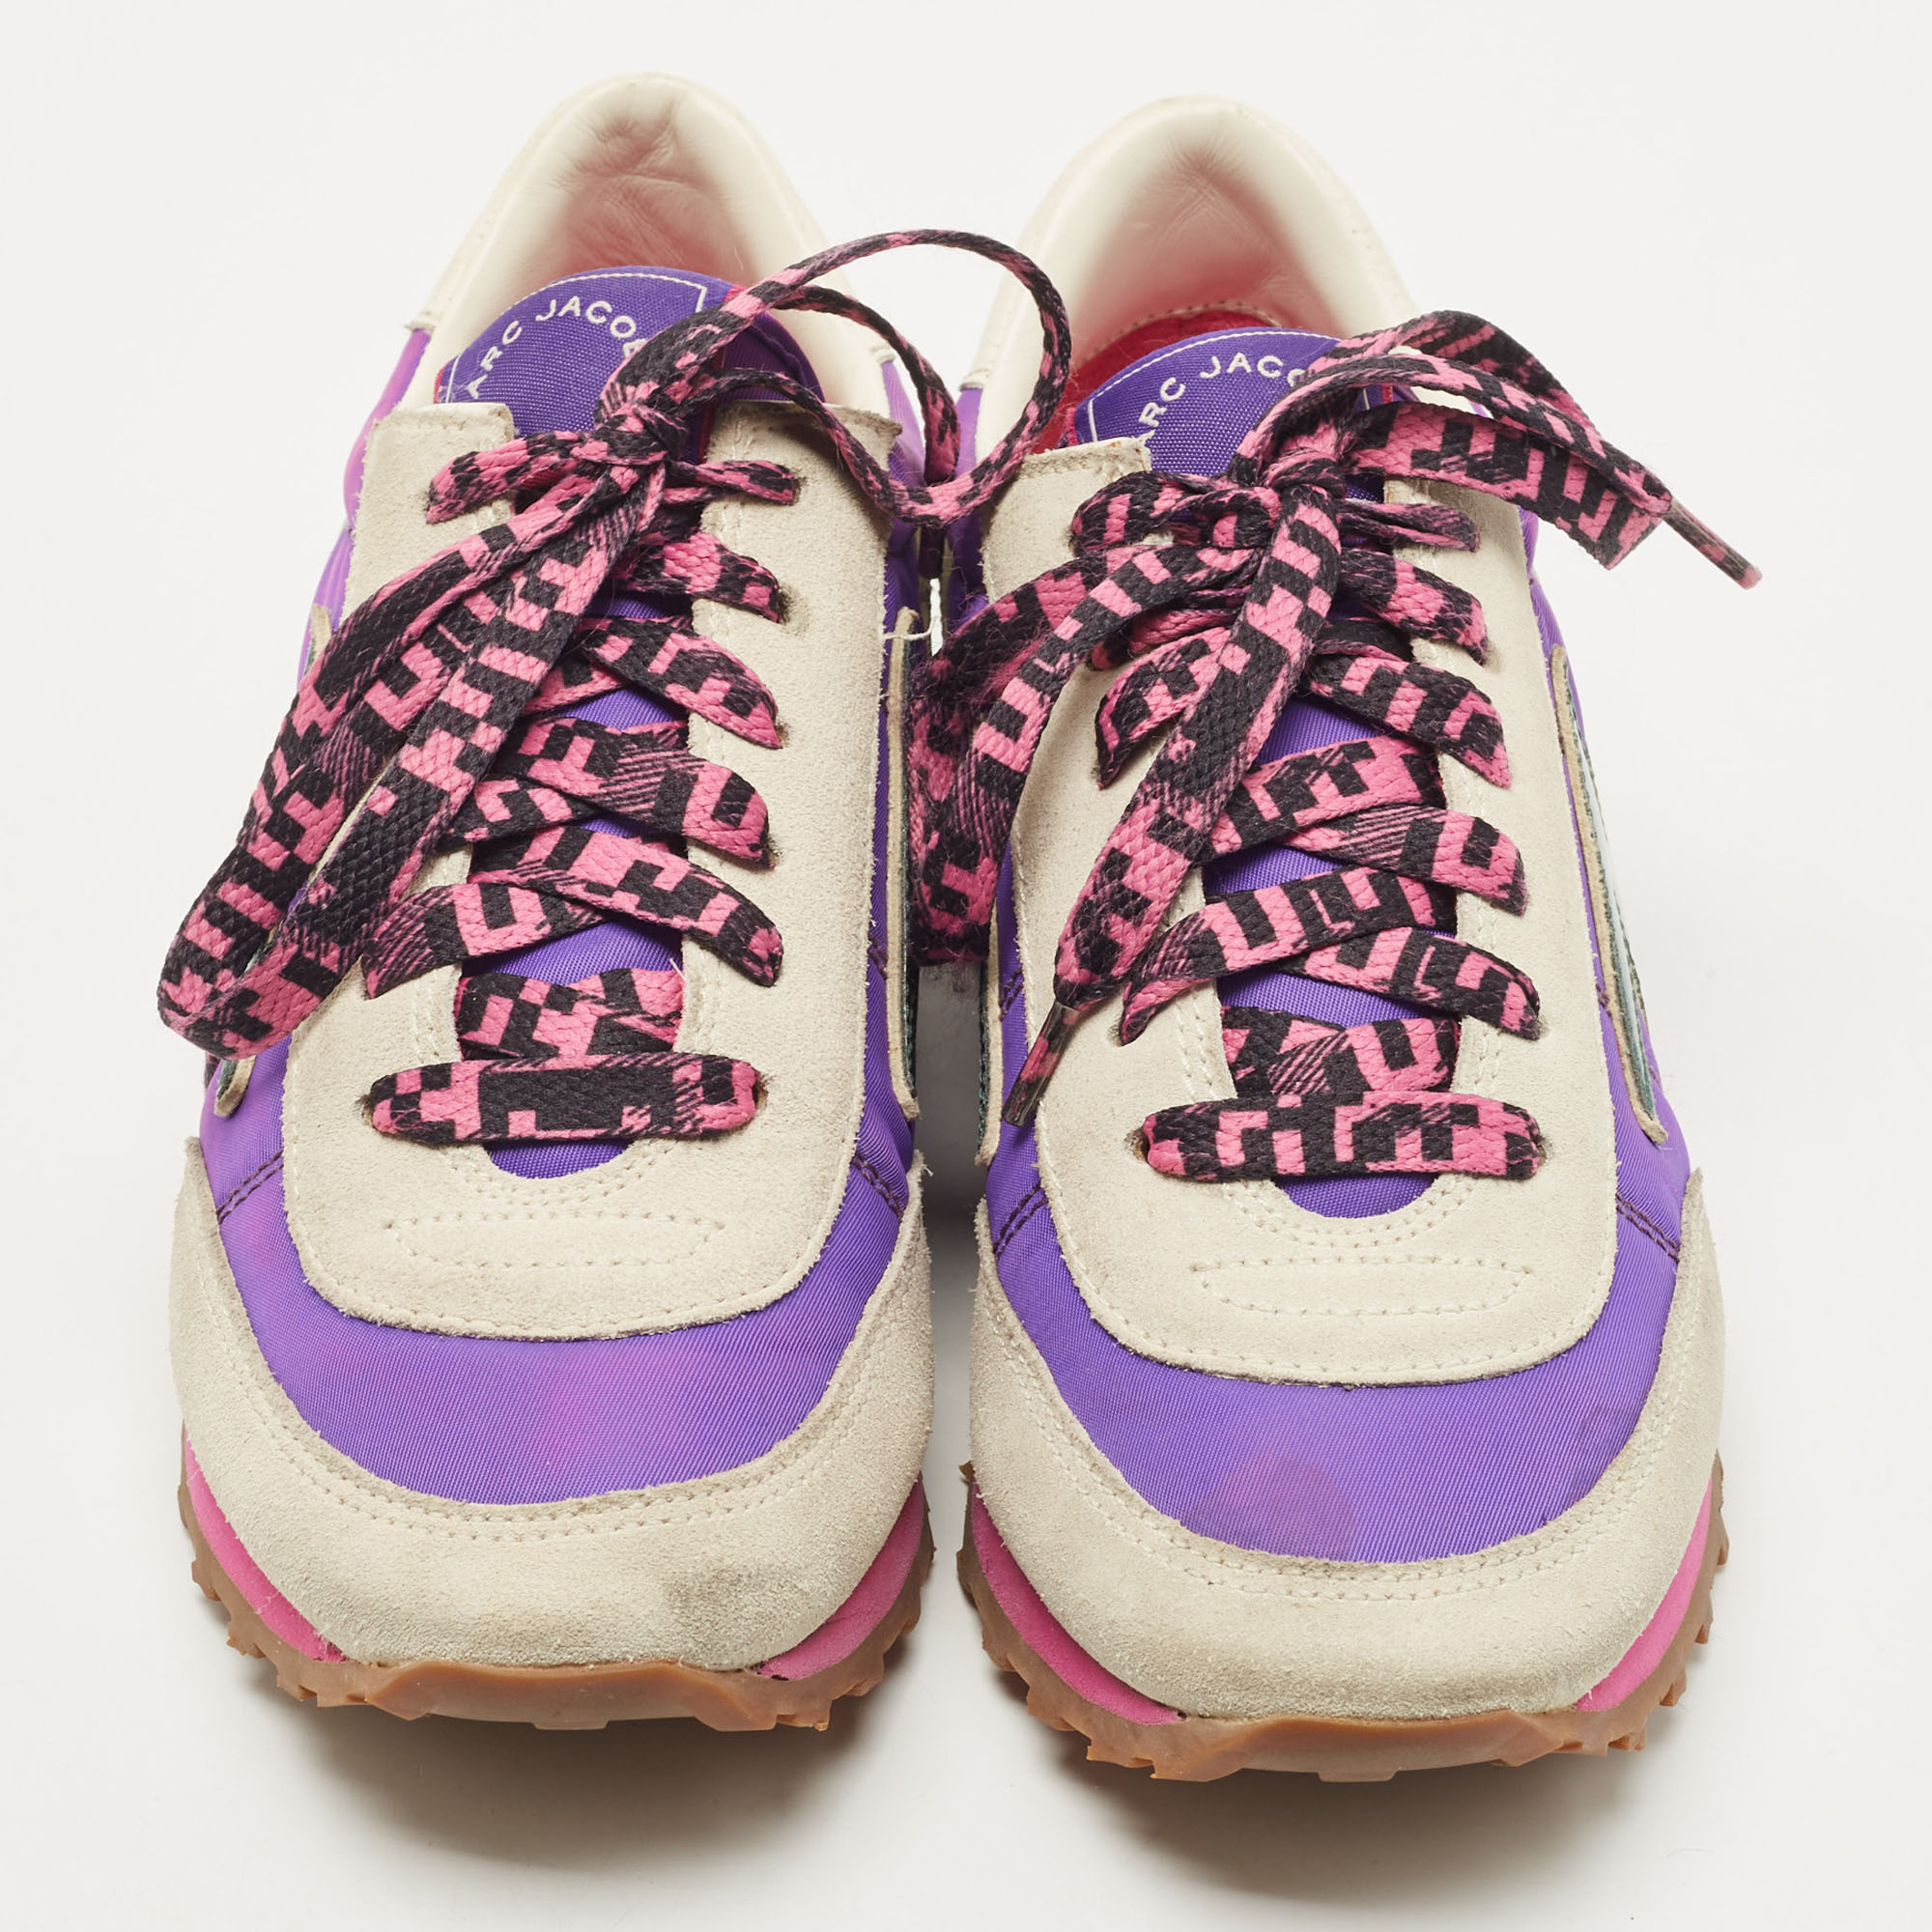 Marc Jacobs Multicolor Fabric And Suede Lightning Bolt Sneakers Size 35